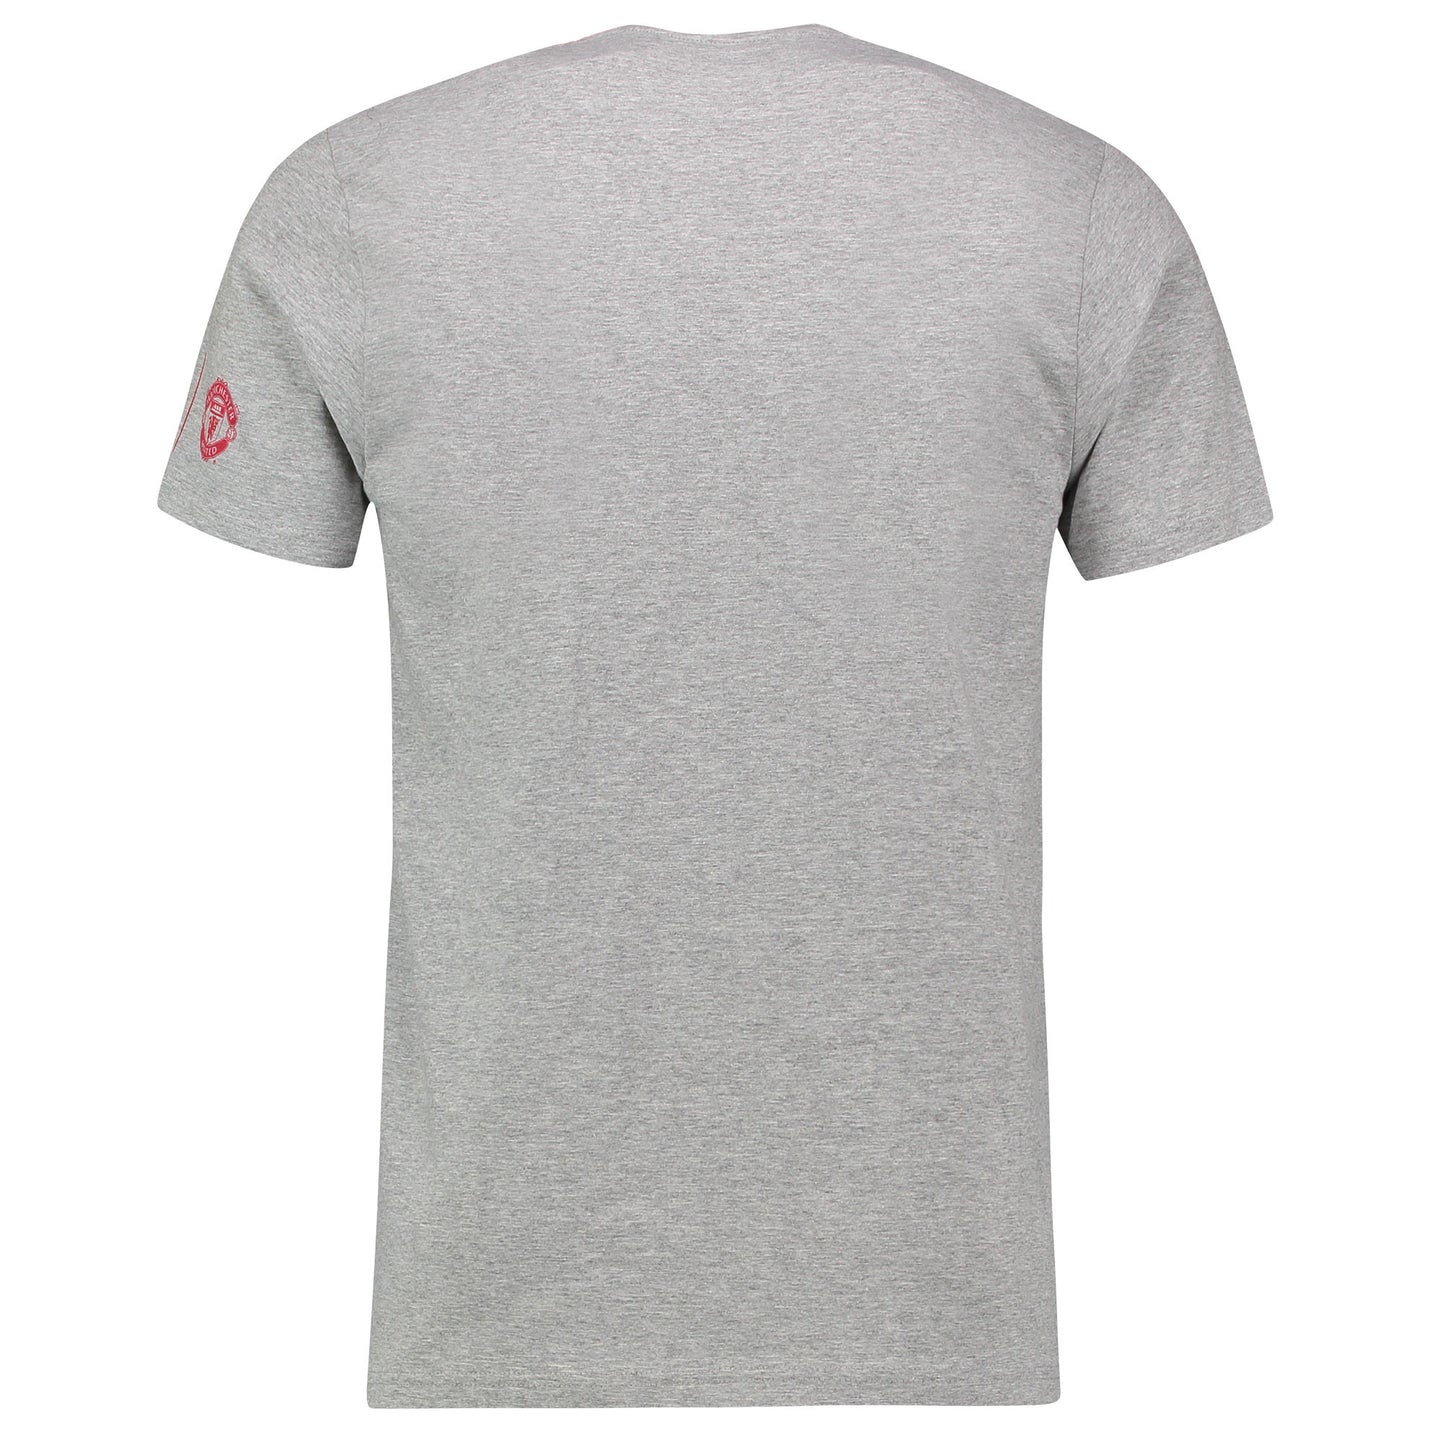 Manchester United Men's adidas Heather Gray Take Me Holm T-Shirt